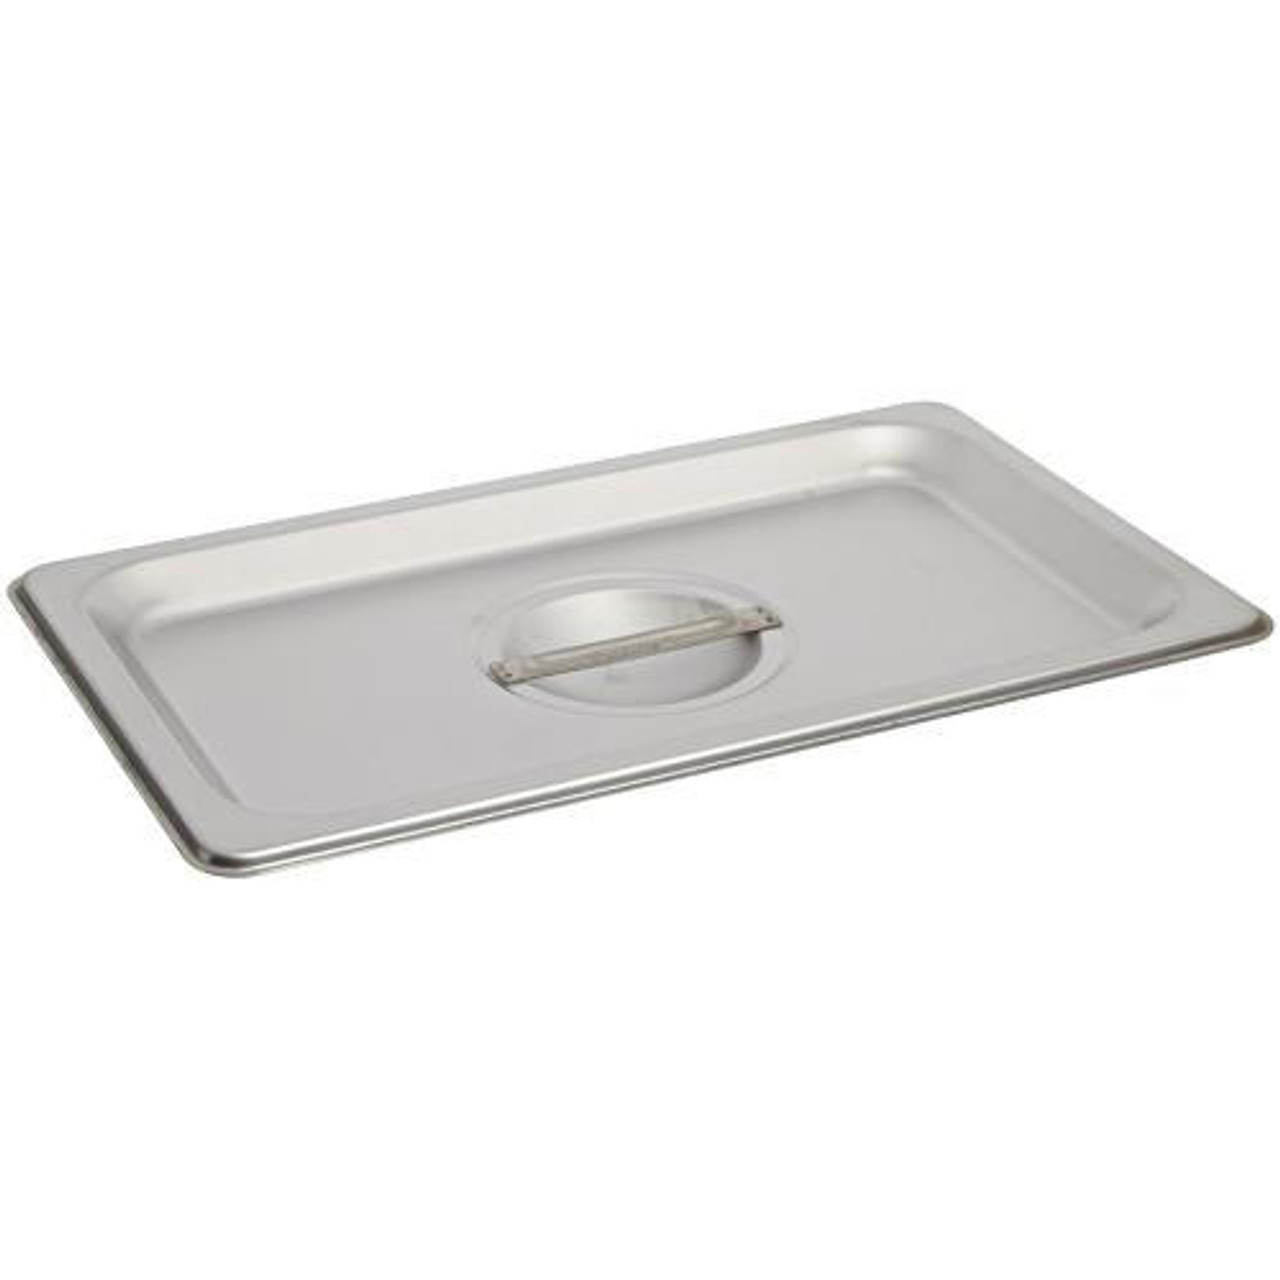 Stainless Steel Flat Tray (New)